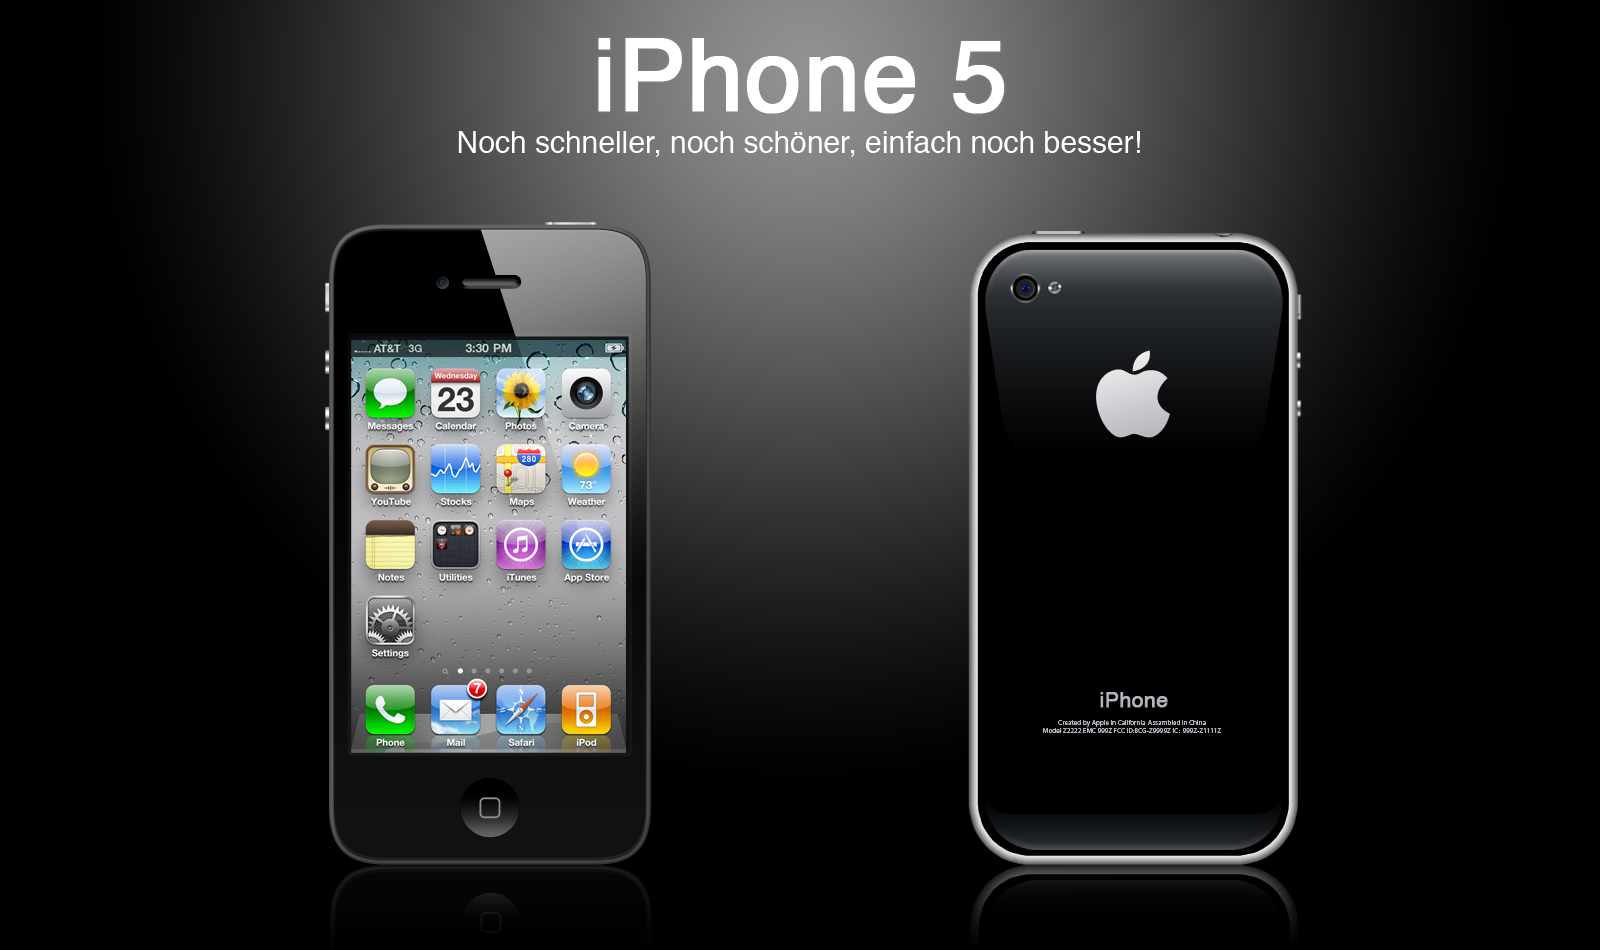 wallpapers if iPhone 5 and review ~ Apple